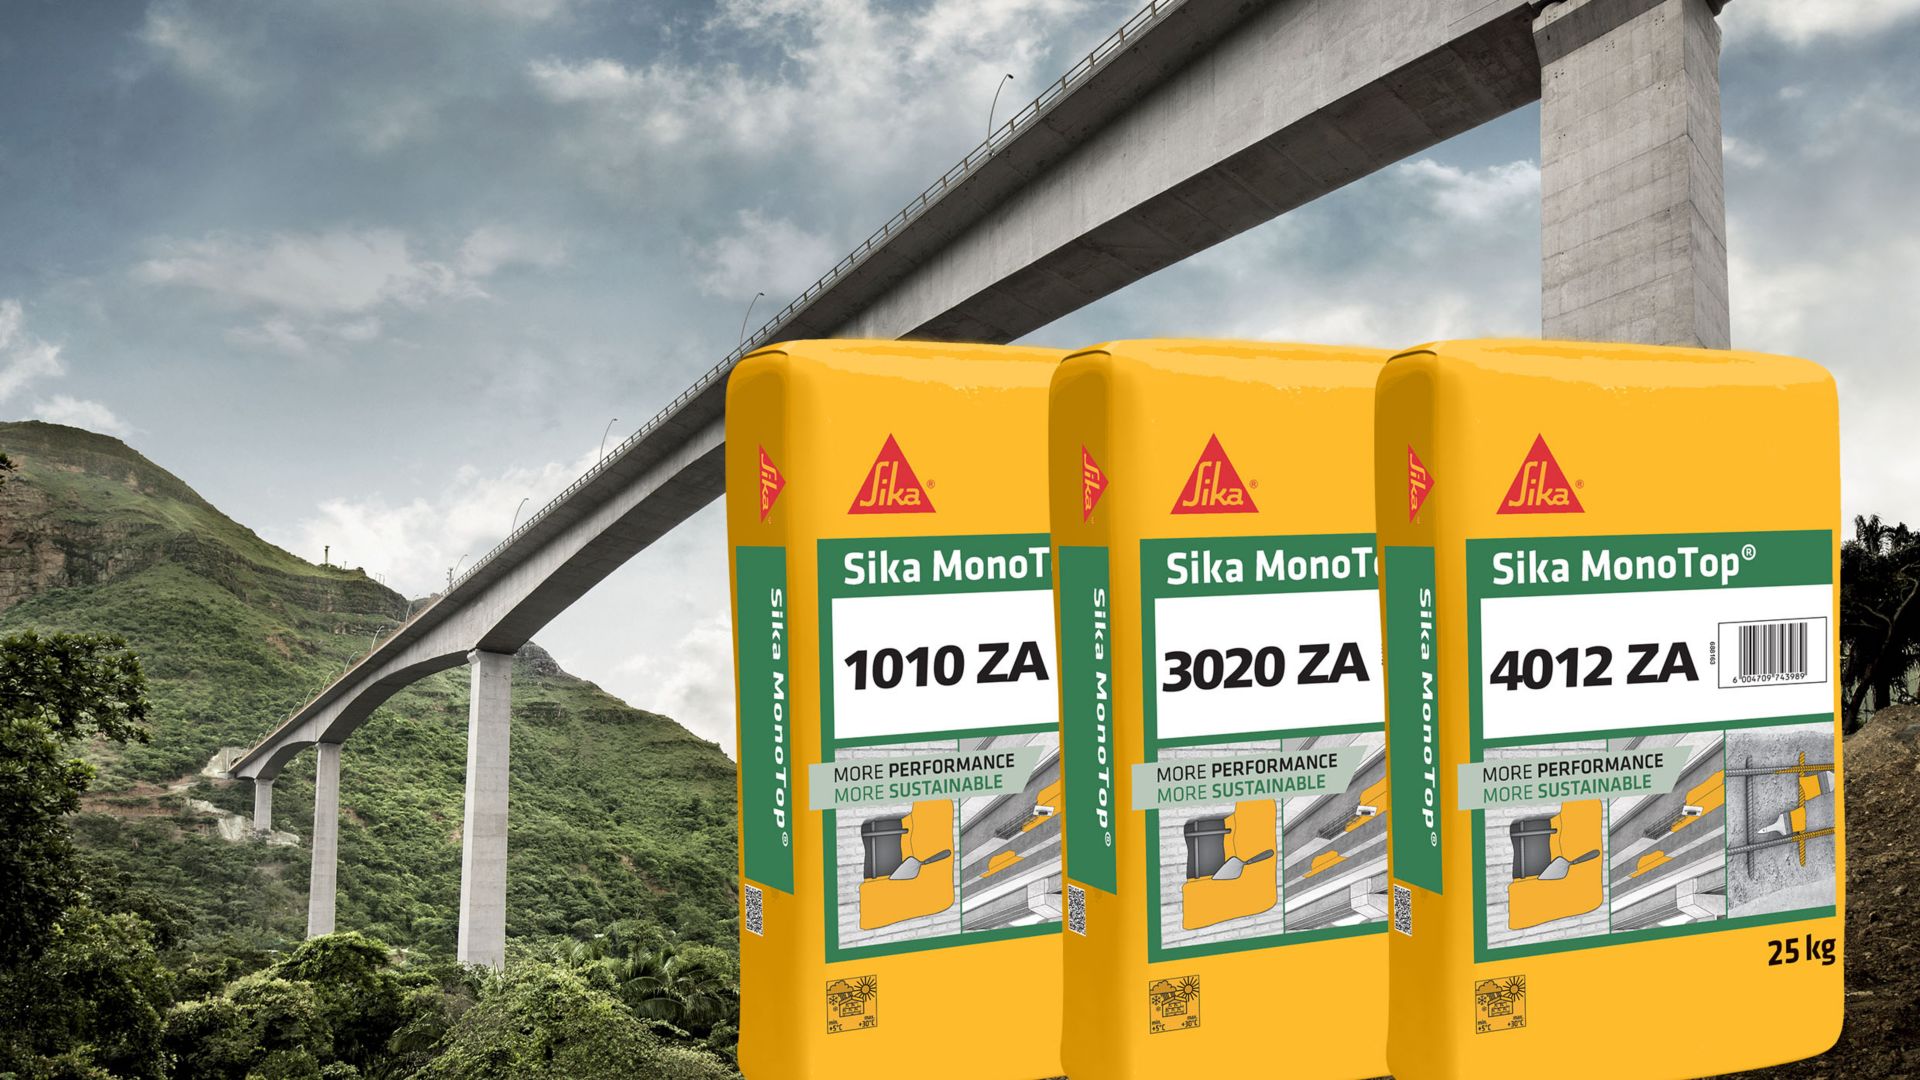 Sika's new concrete repair solution provides long-term protection for buildings and sets a new standard for low environmental impact concrete by reducing CO2 emissions.